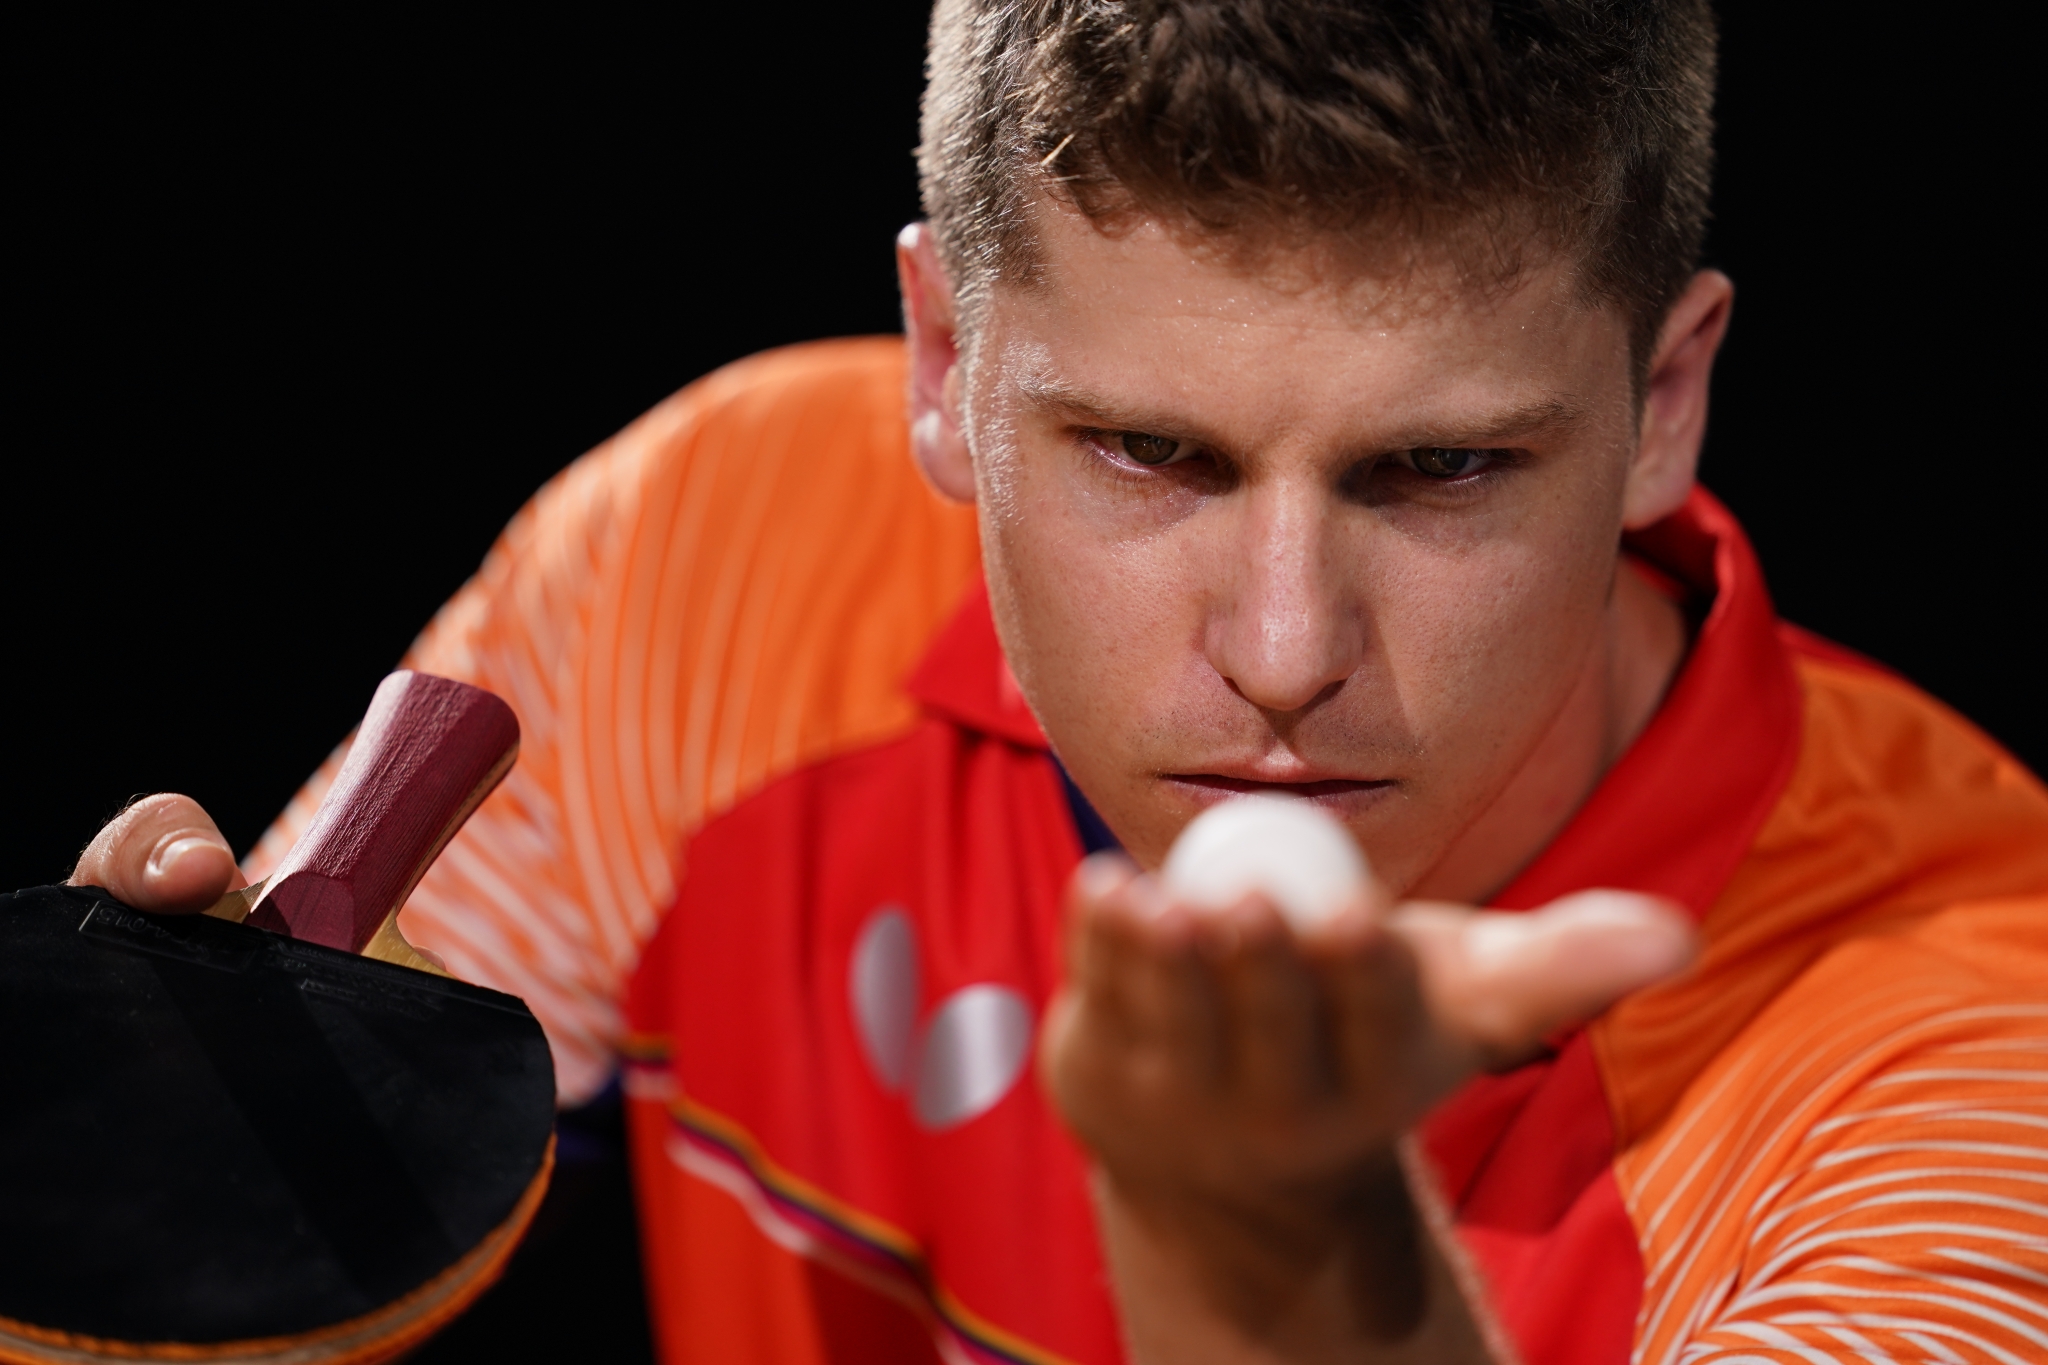 Close-up of table tennis player looking at the white ball in his palm